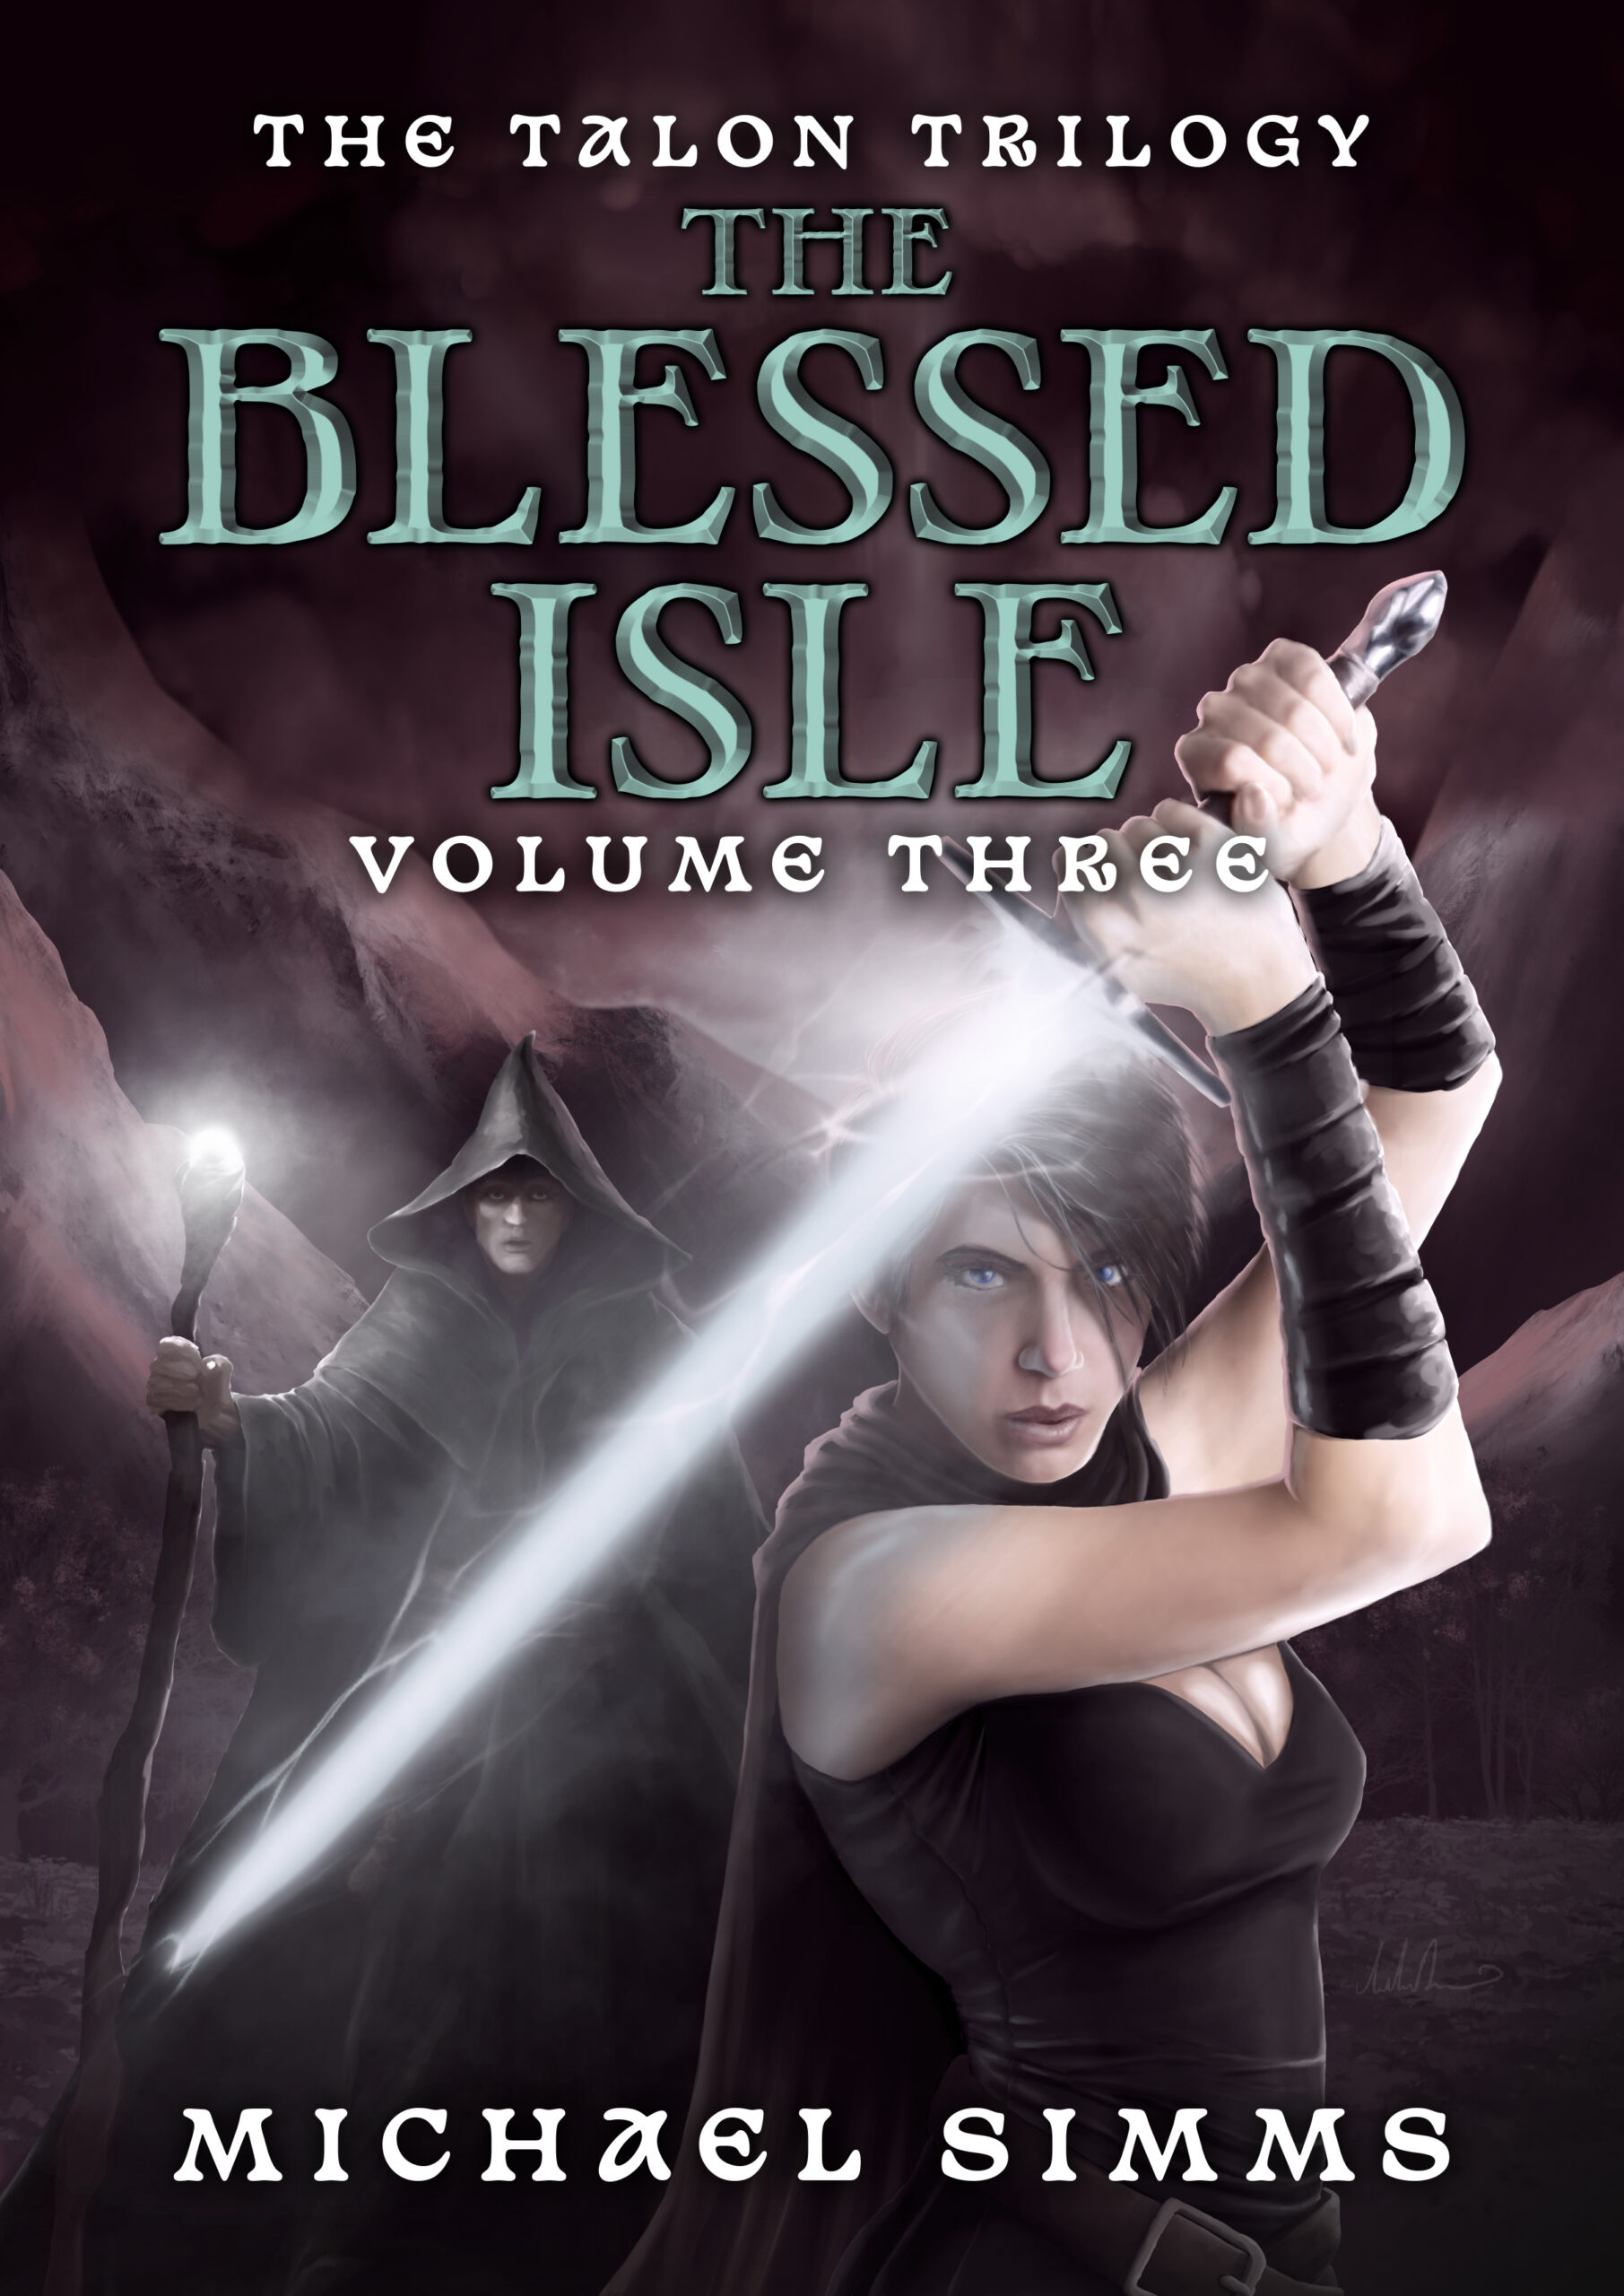 The Talon Trilogy: Volume Three, The Blessed Isle by Michael Simms coming February 2025. Cover shows a warior woman with a glowing sword in a dark landscaped. She is followed by a mage with a glowing gem in his staff.